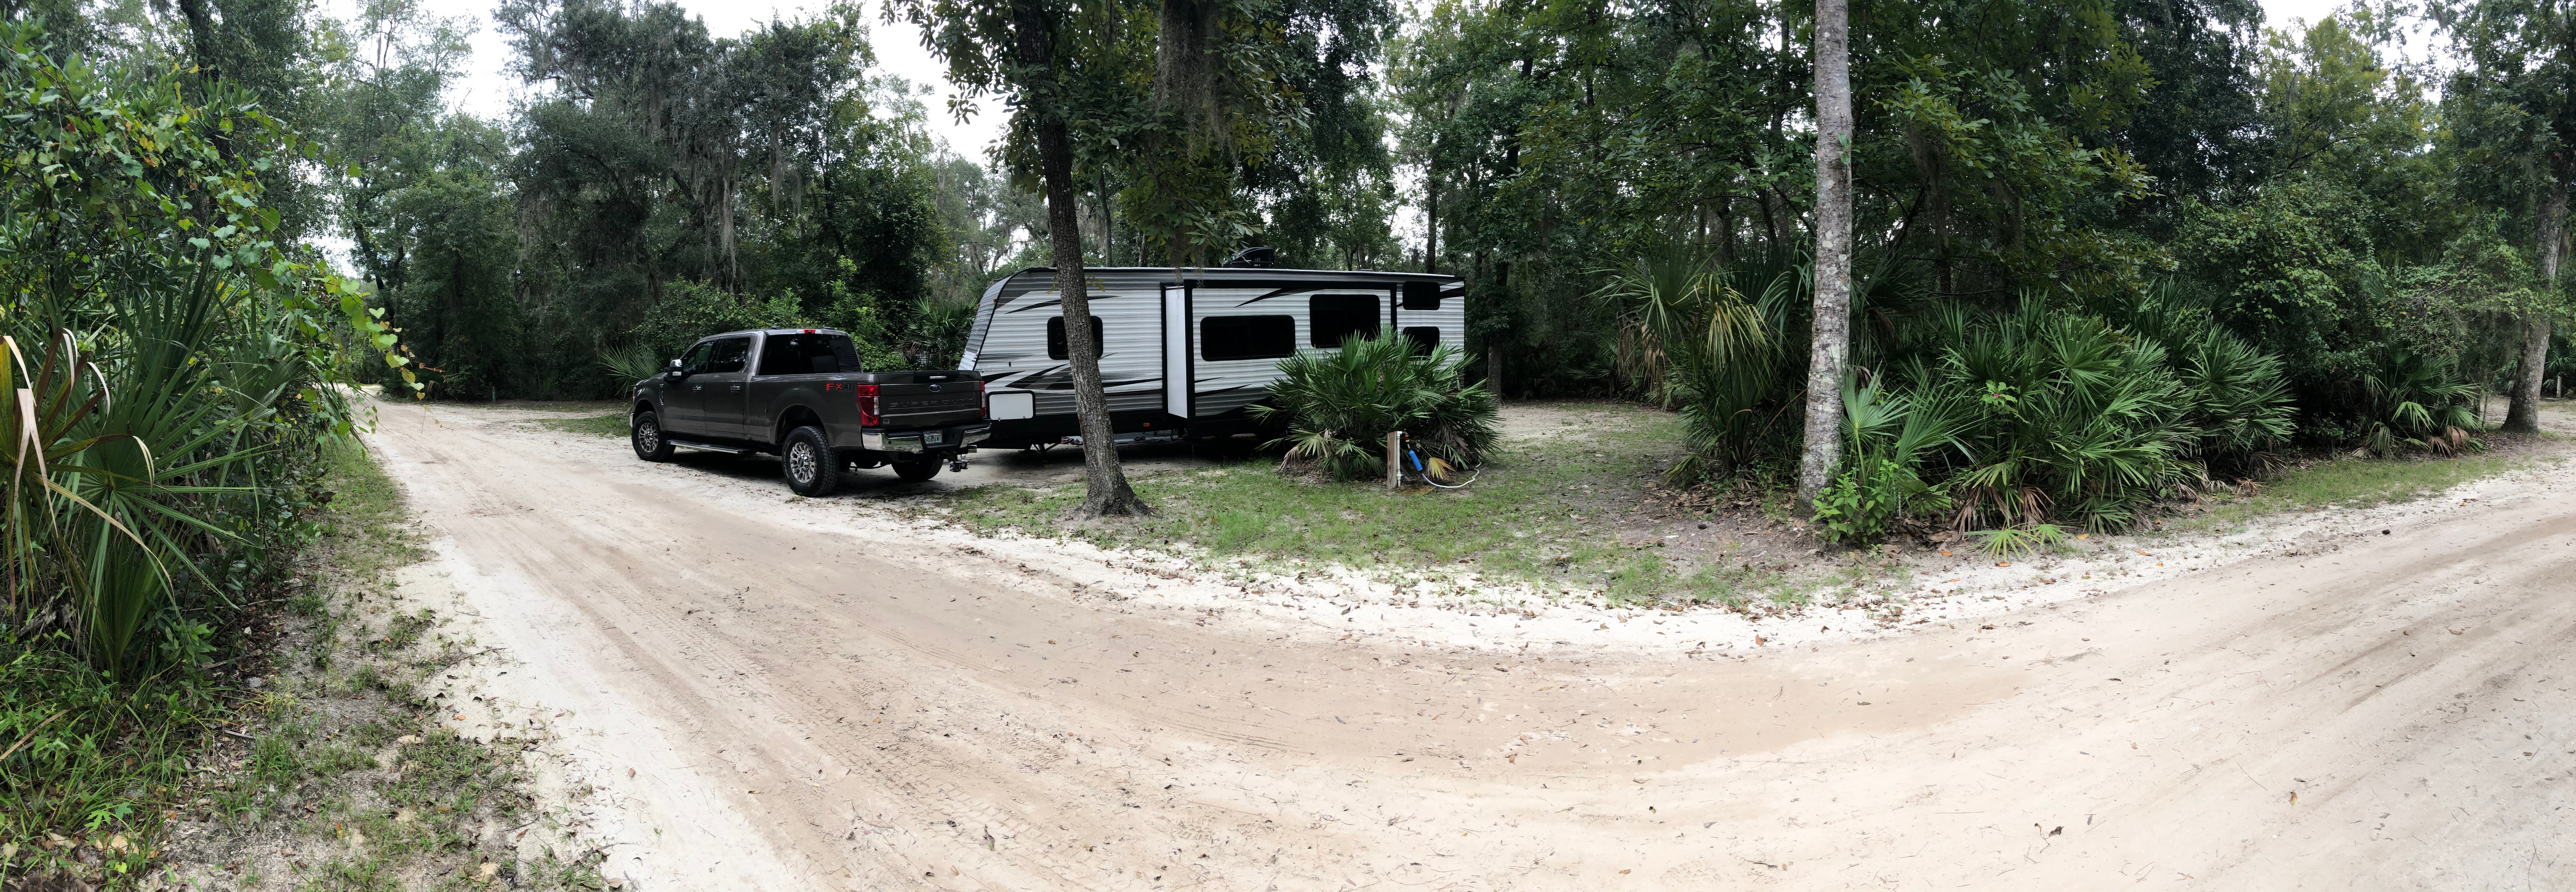 Camper submitted image from Faver-Dykes State Park - 1